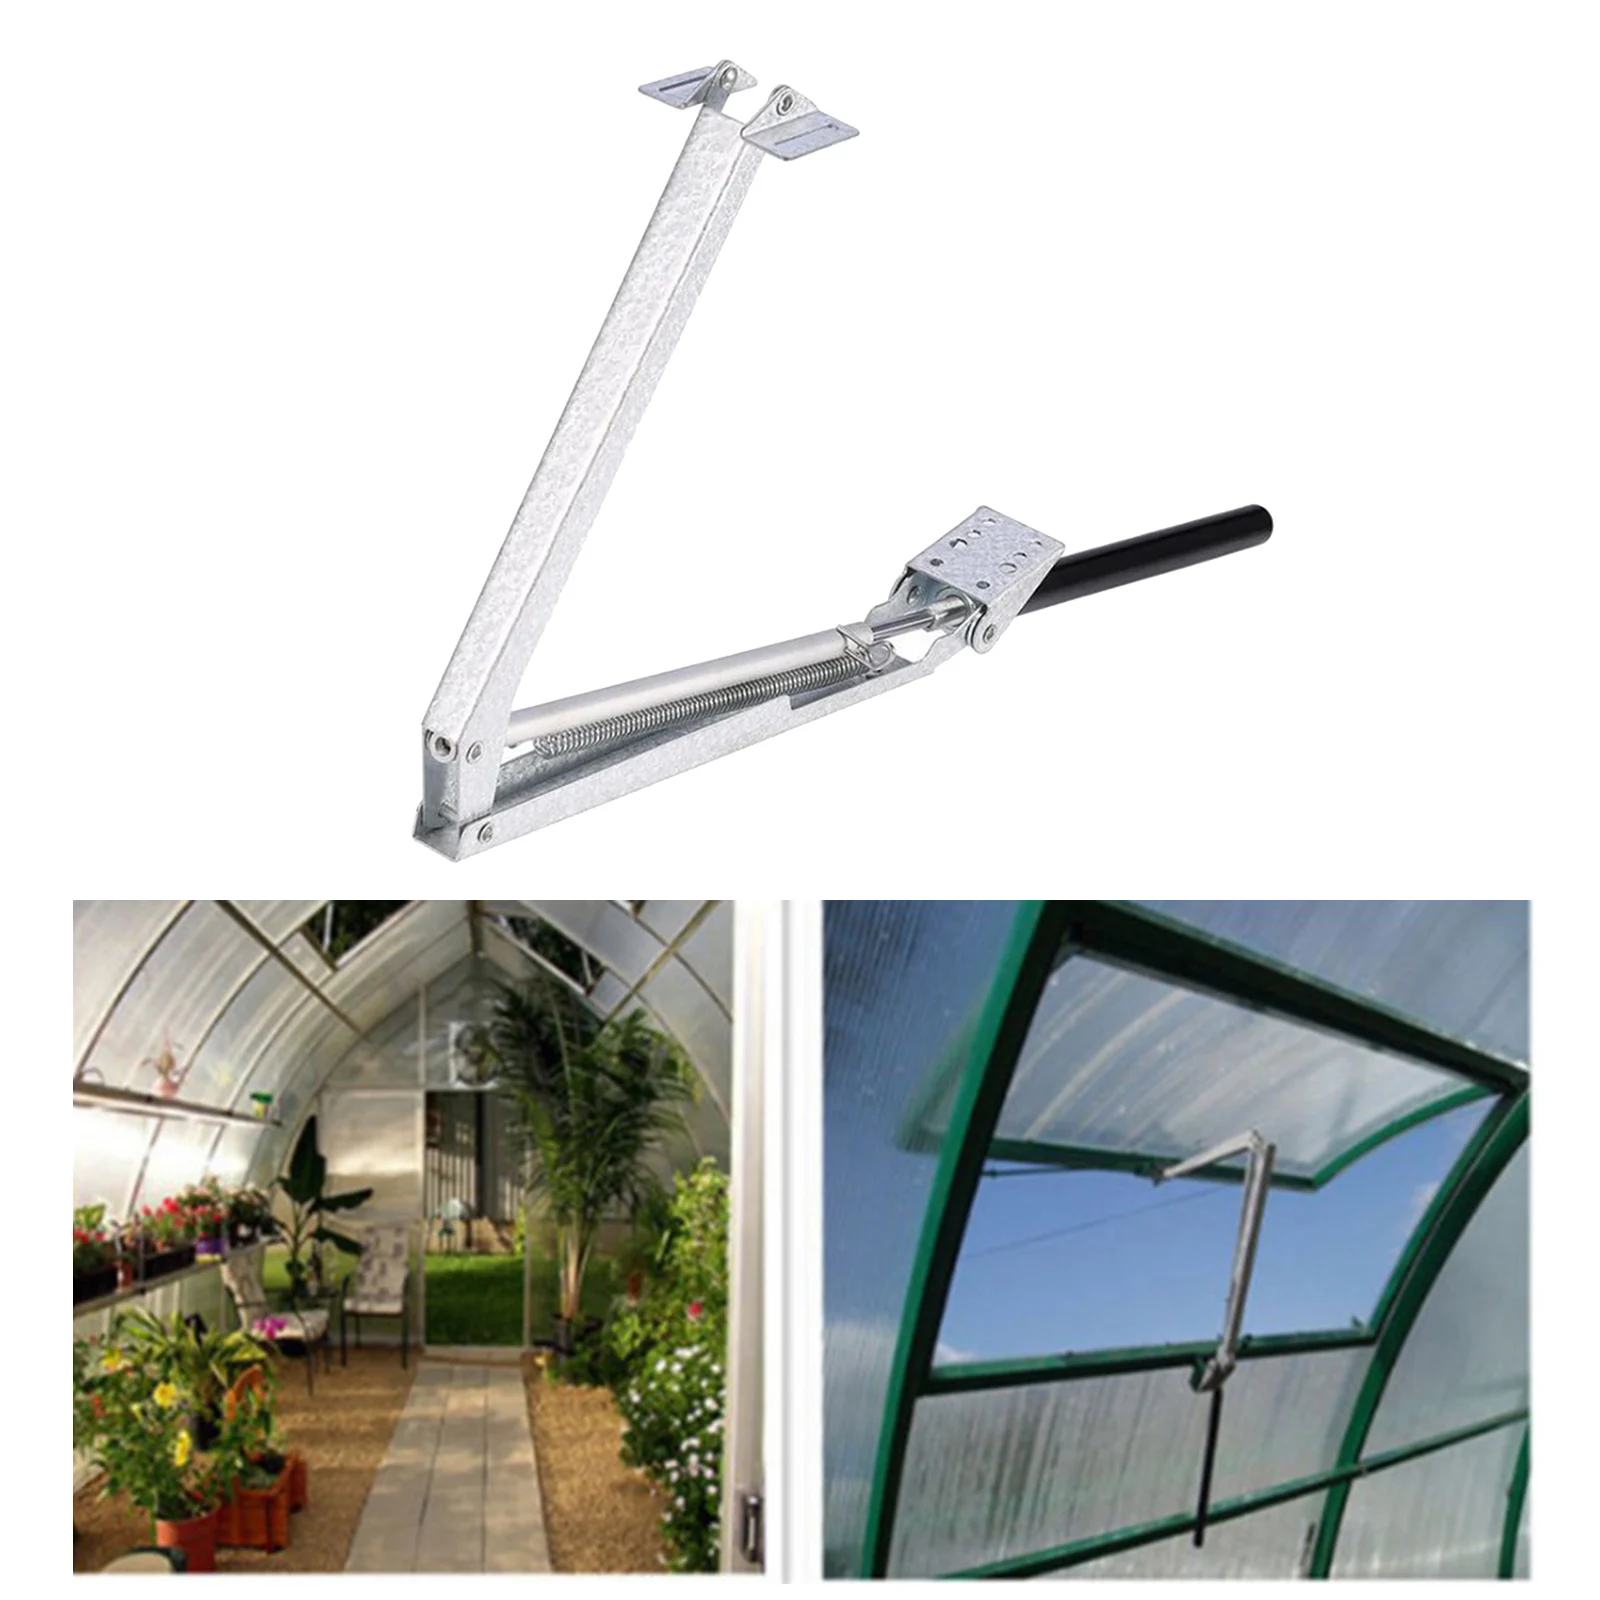 Automatic Greenhouse Window Opener Adjustable Auto Vent Opener Lifts 7-15kg